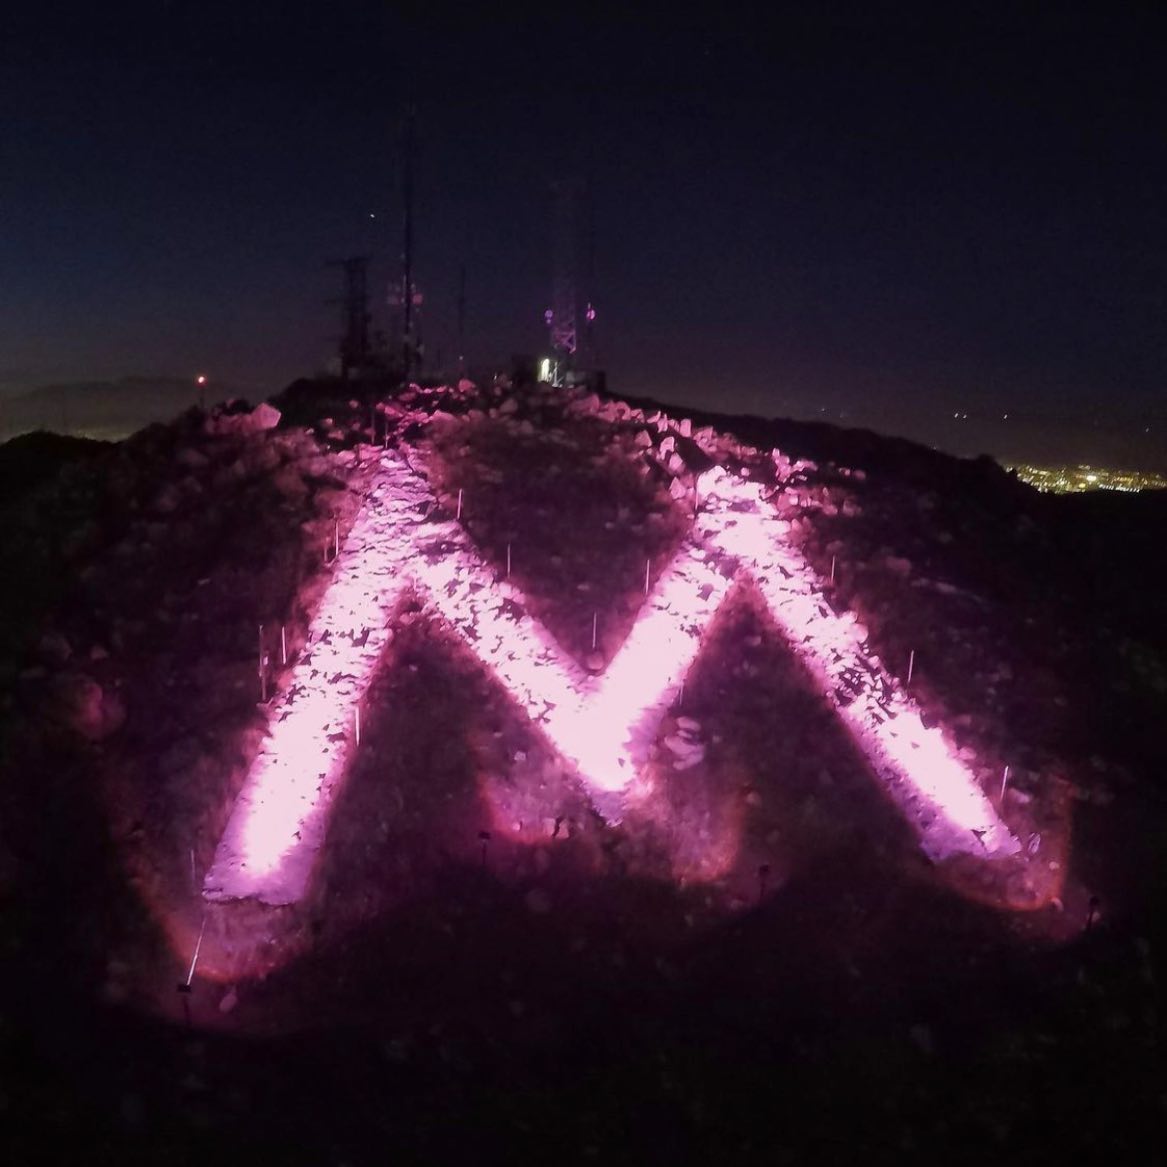 Tonight, the M on Box Springs Mountain will be lit pink in honor of Mother's Day.
.
.
#morenovalley #ilovemoval #mlighting #mothersday #moms #mothers #mother